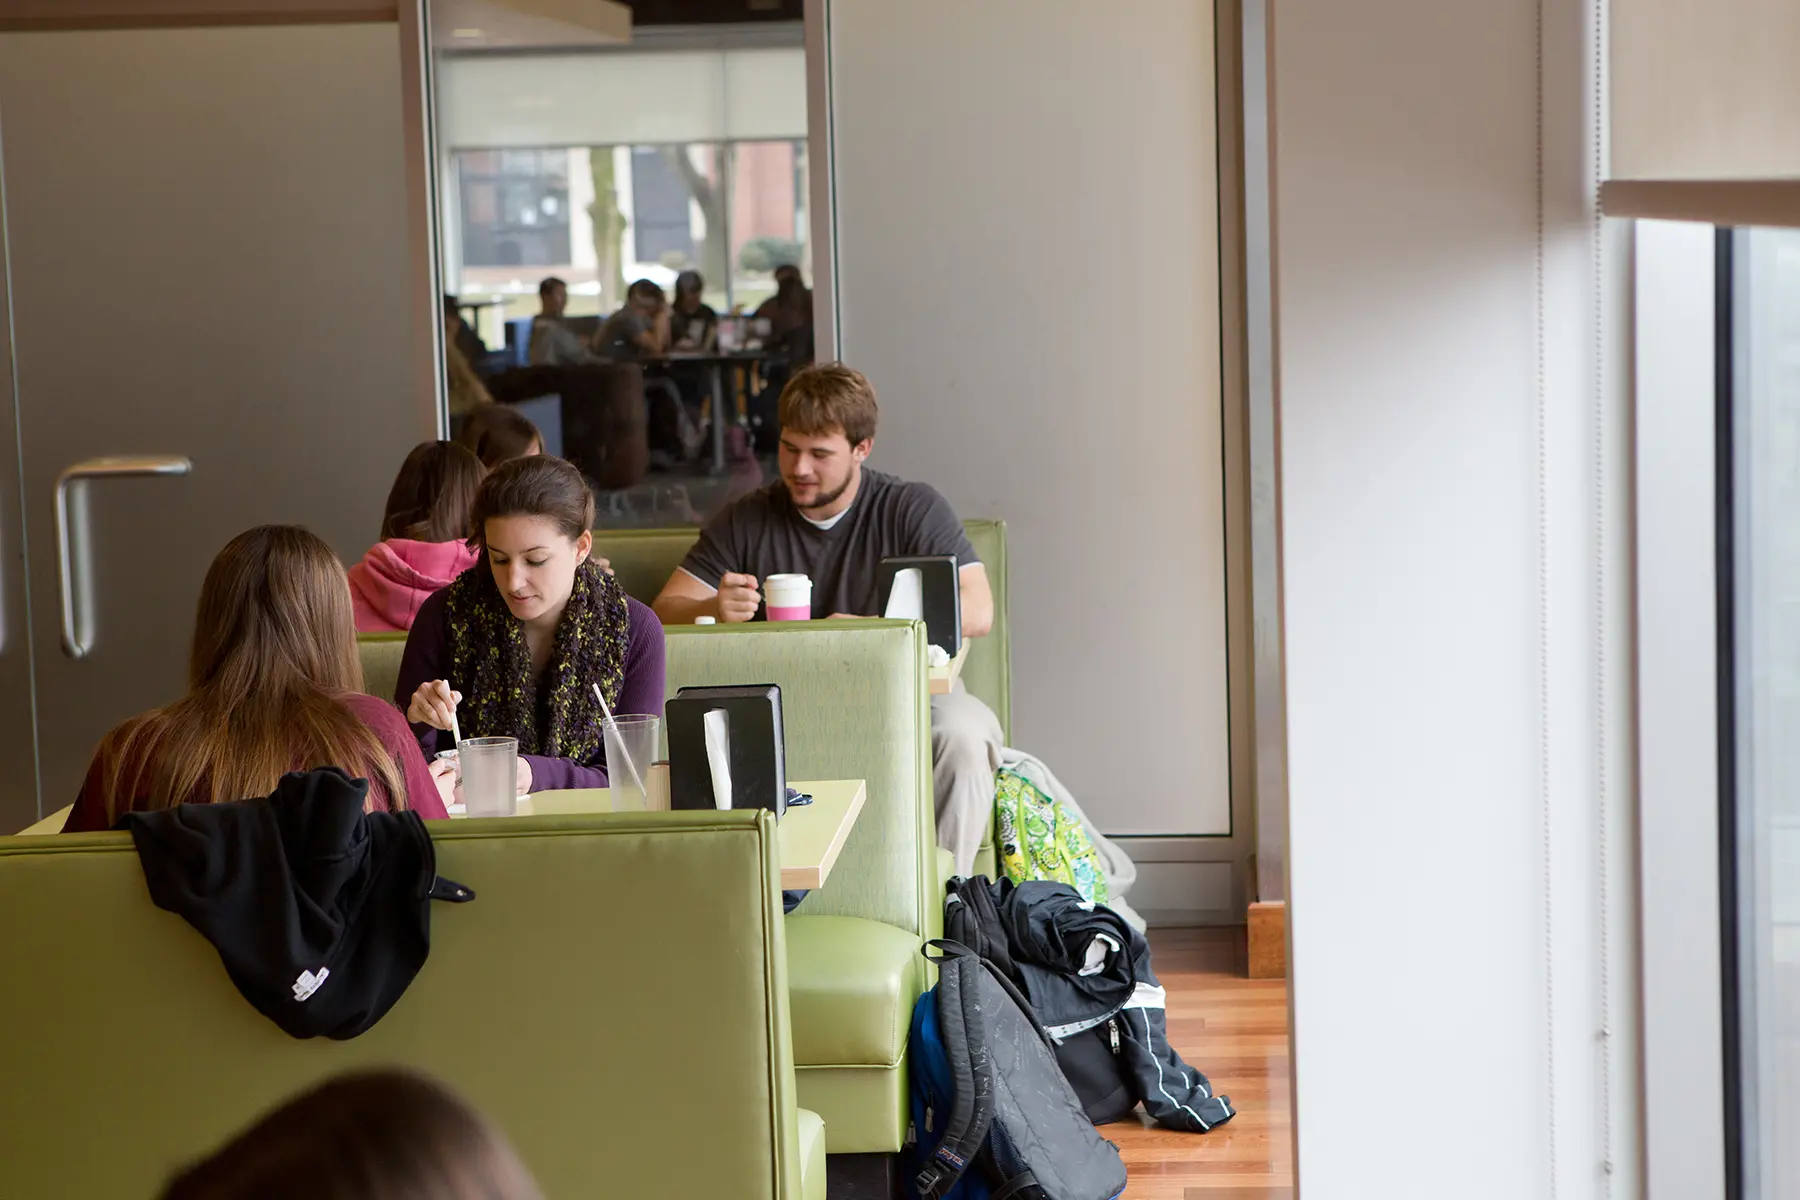 Students sit in booths eating and studying